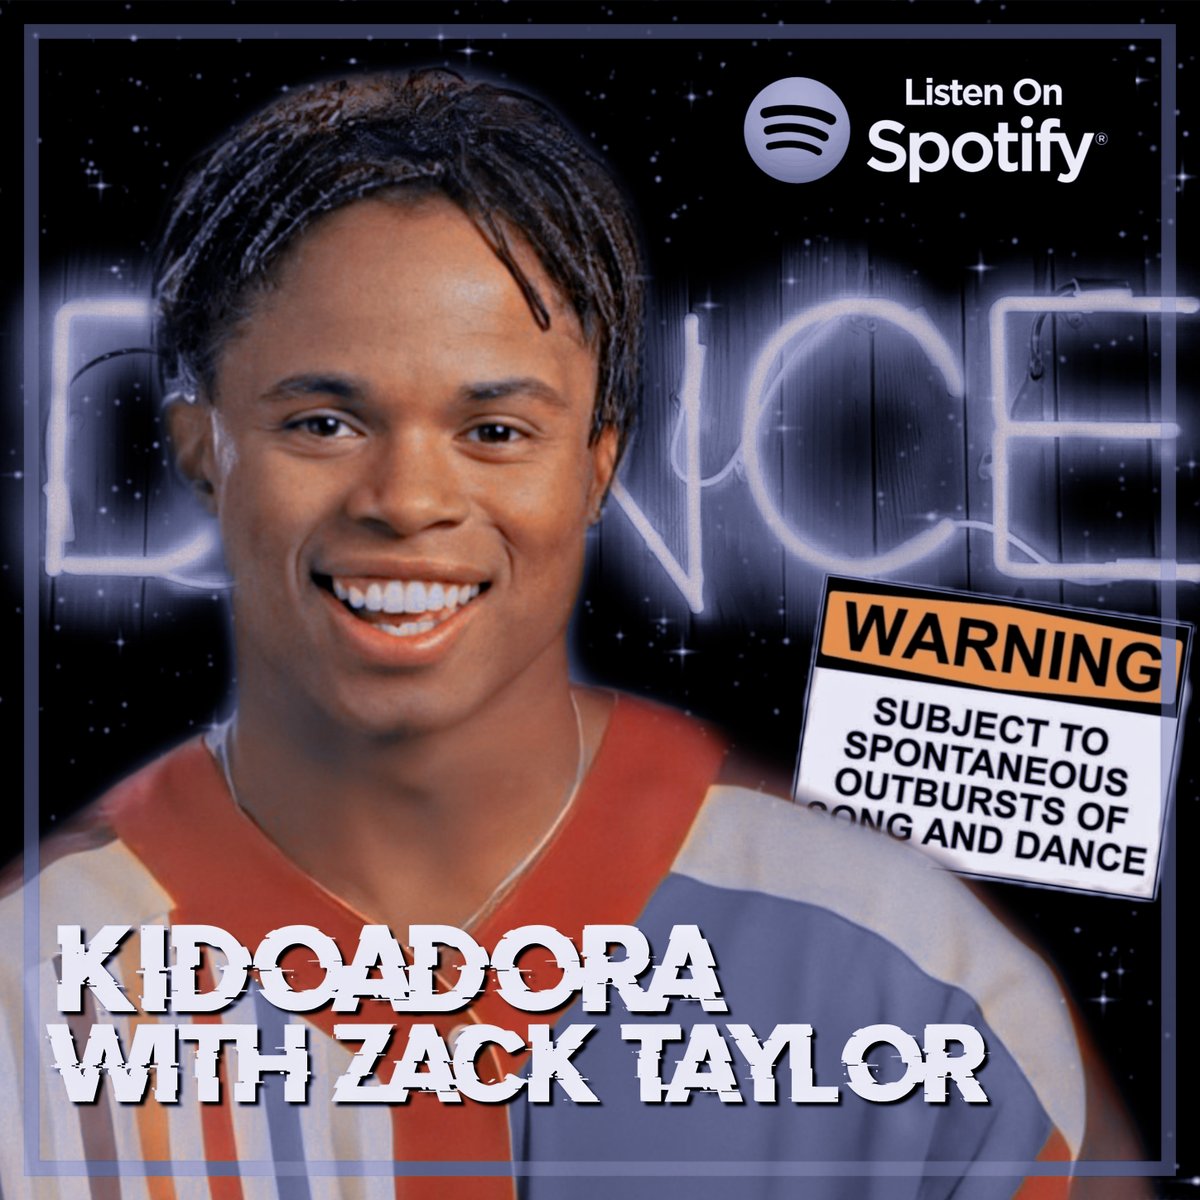 5. Last but not least: Kidoadora : Podcast with the creator of hip hop kido plus world class salsa dancer for all things dance! @Walterejones